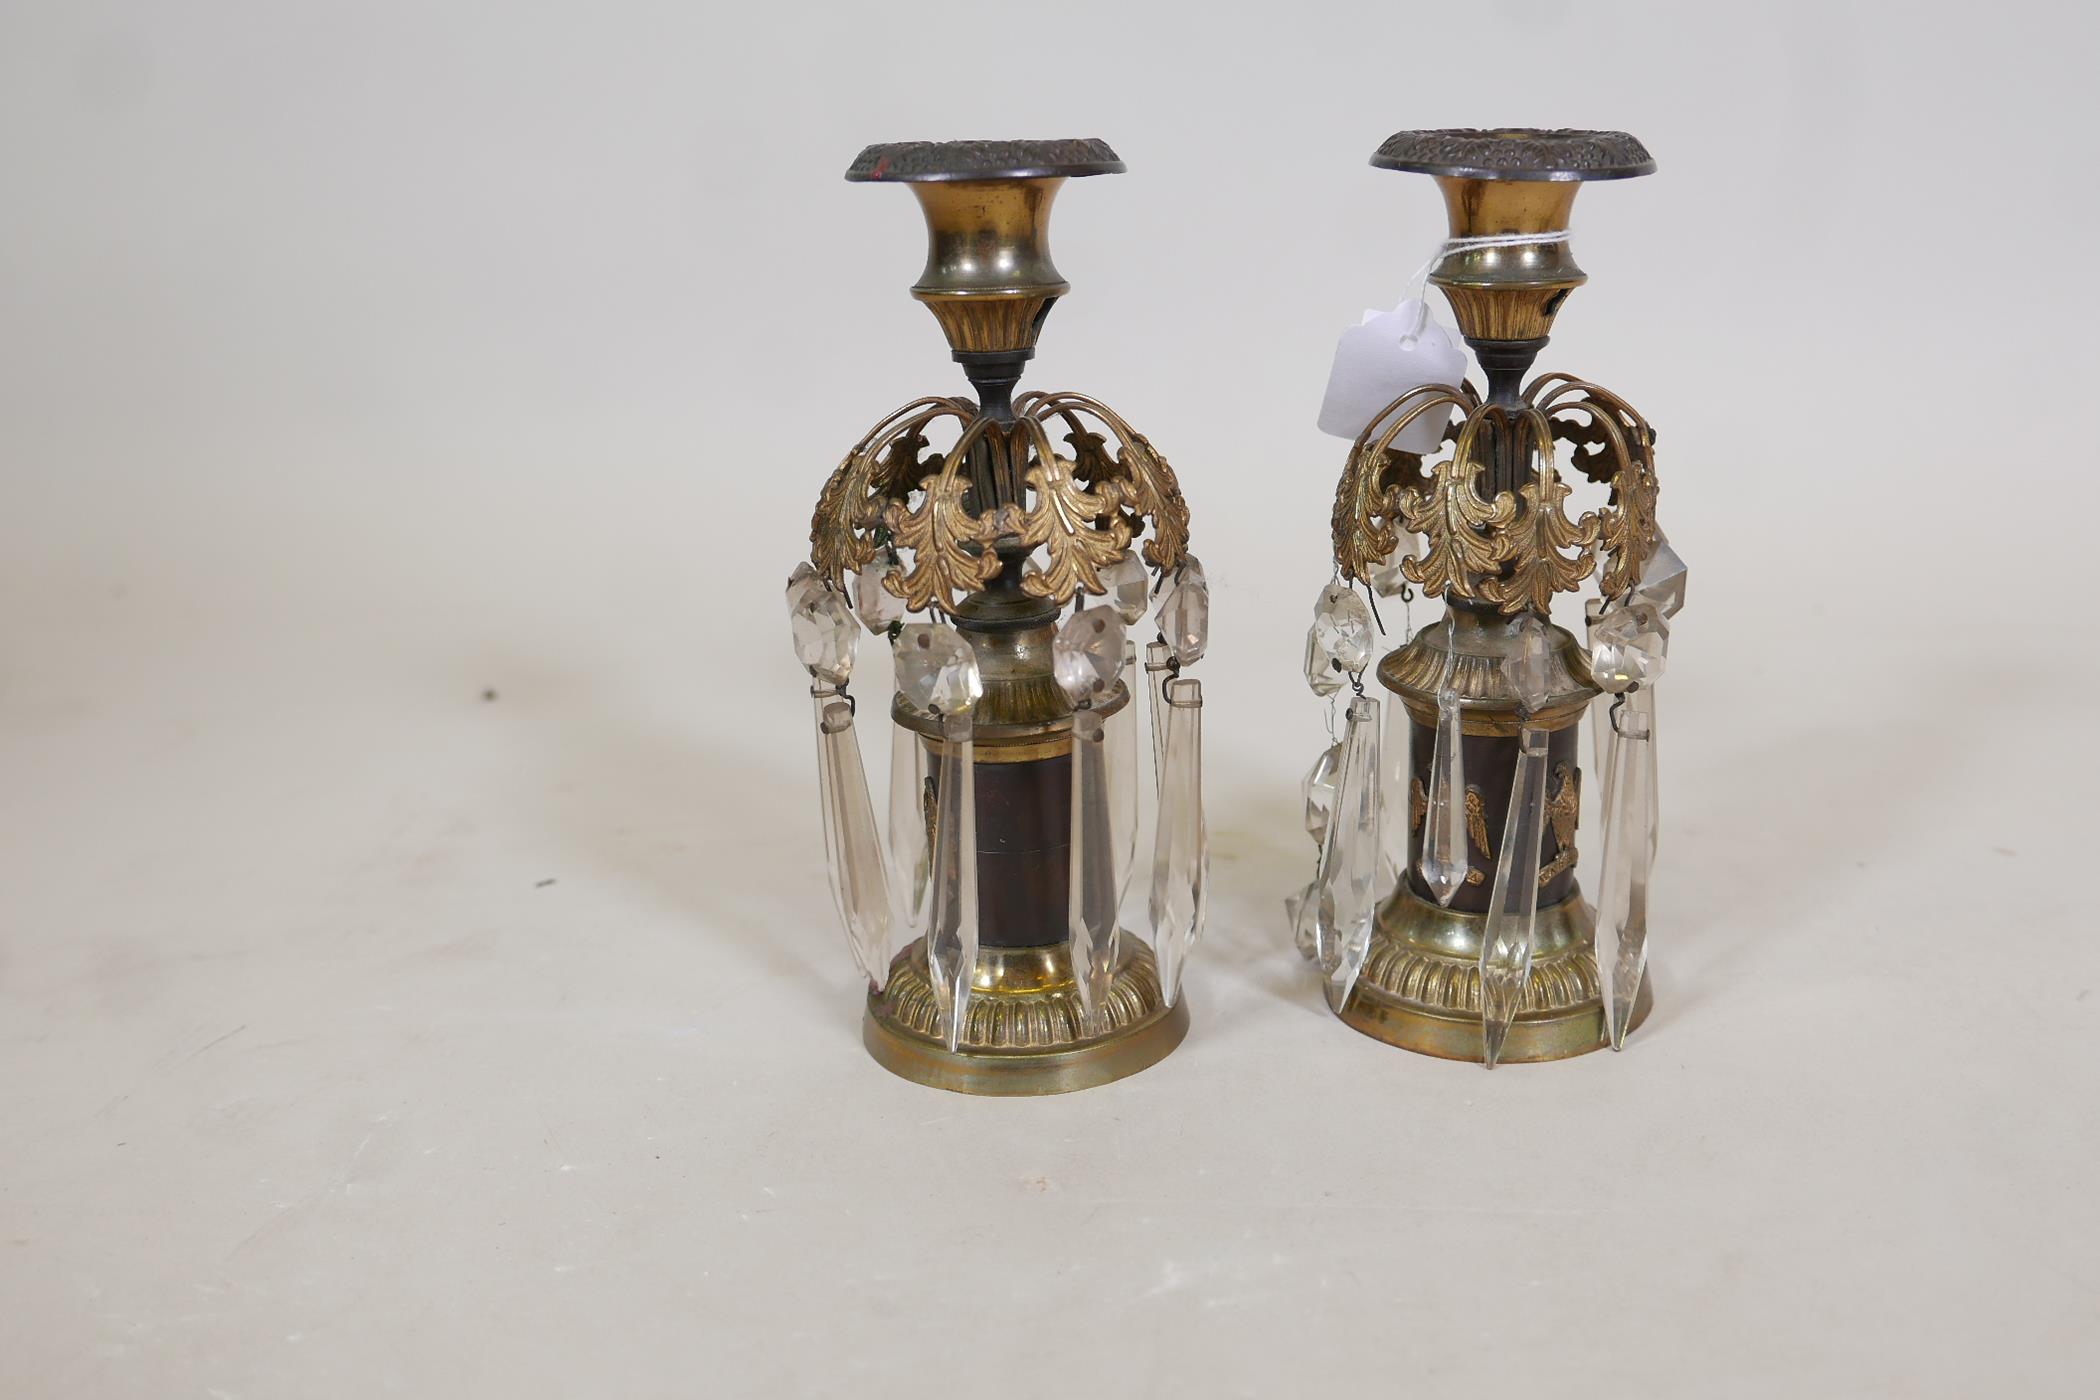 A pair of C19th bronze and ormolu mounted candlesticks with glass lustre drops and applied - Image 3 of 4